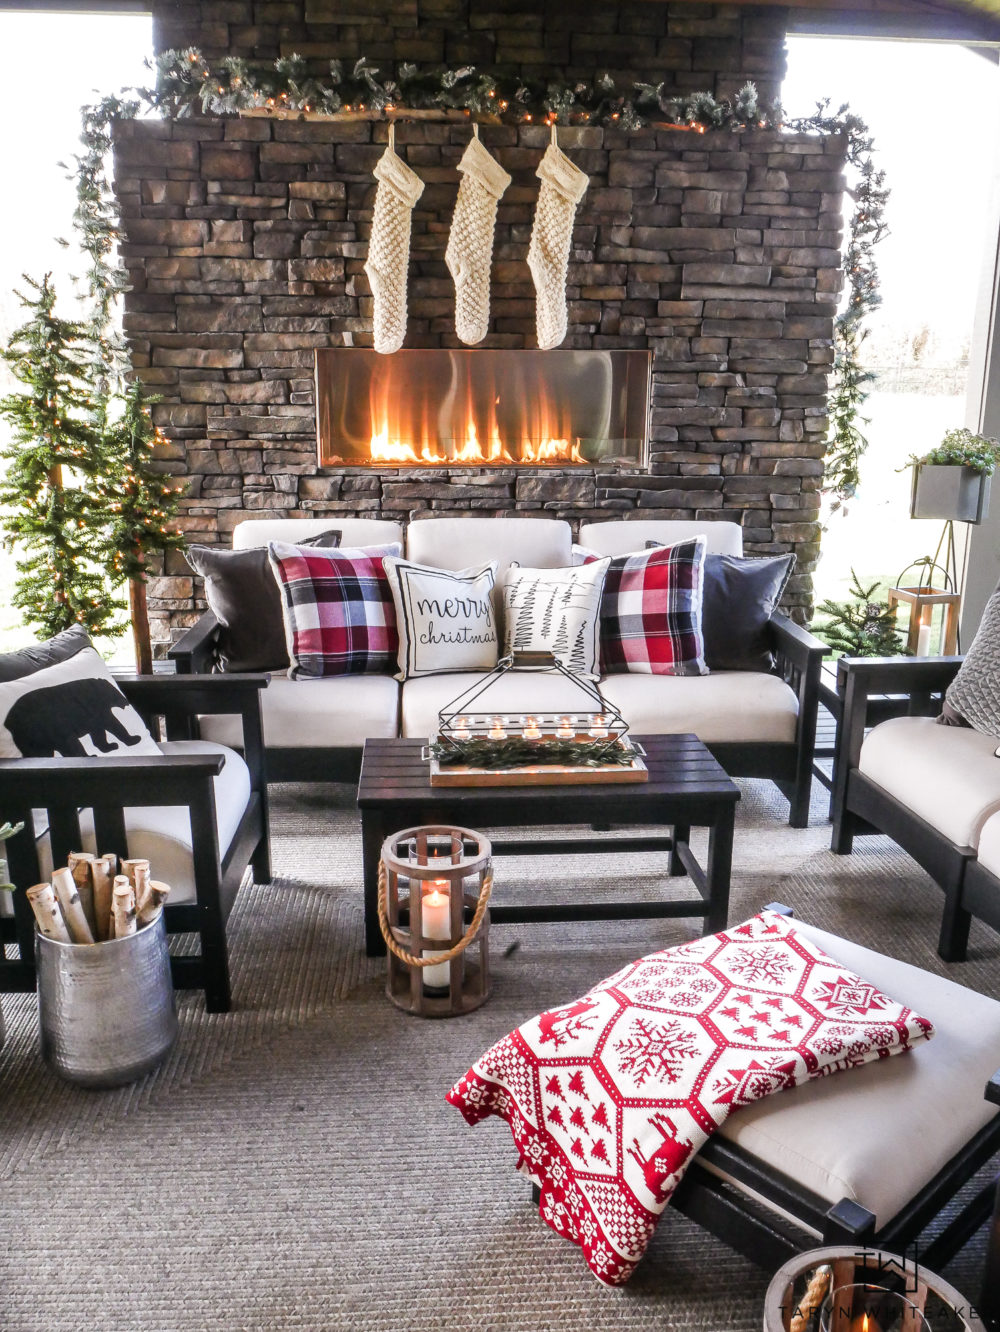 Get tips for decorating your outdoor space for the holidays! This Cozy Christmas Outdoor Living Space is all sorts of cabin chic ! 